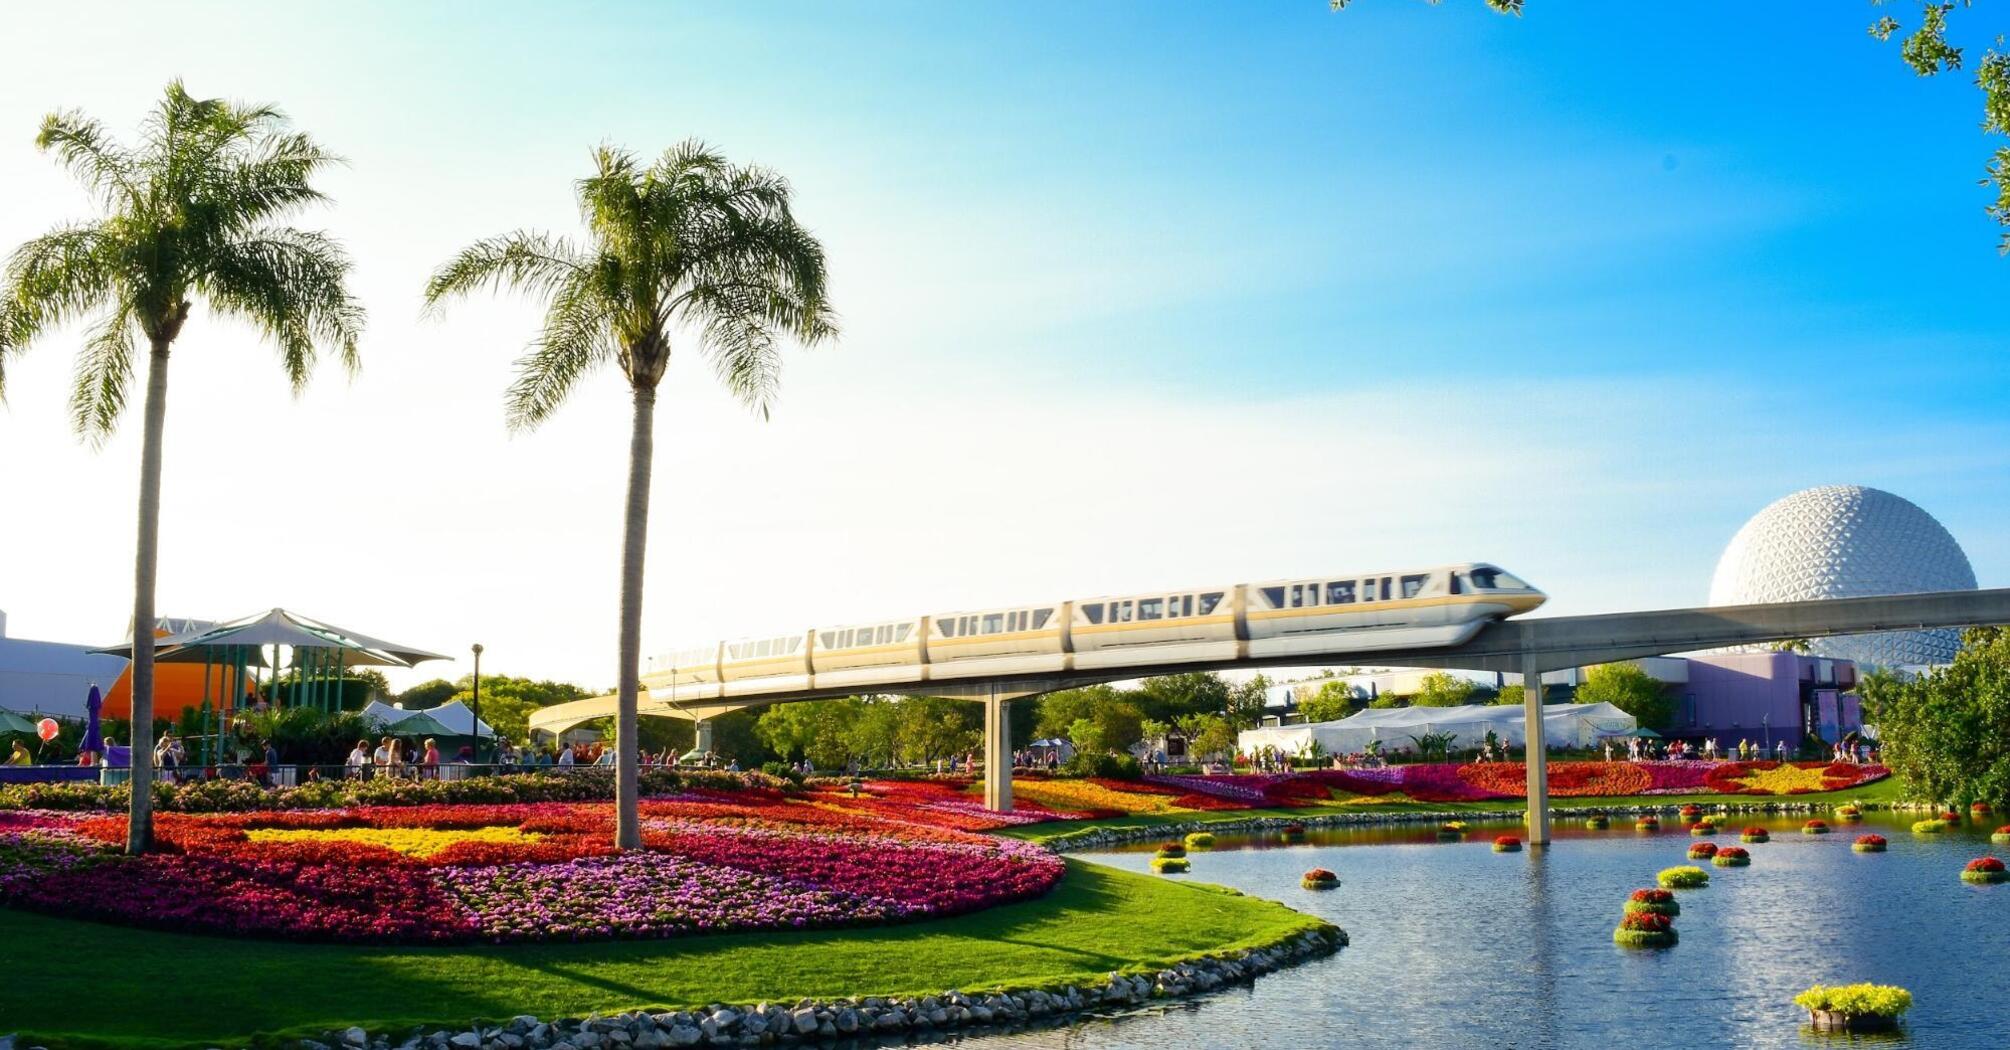 A view of a beautiful landscape with flower beds and a monorail passing through the park on a sunny day